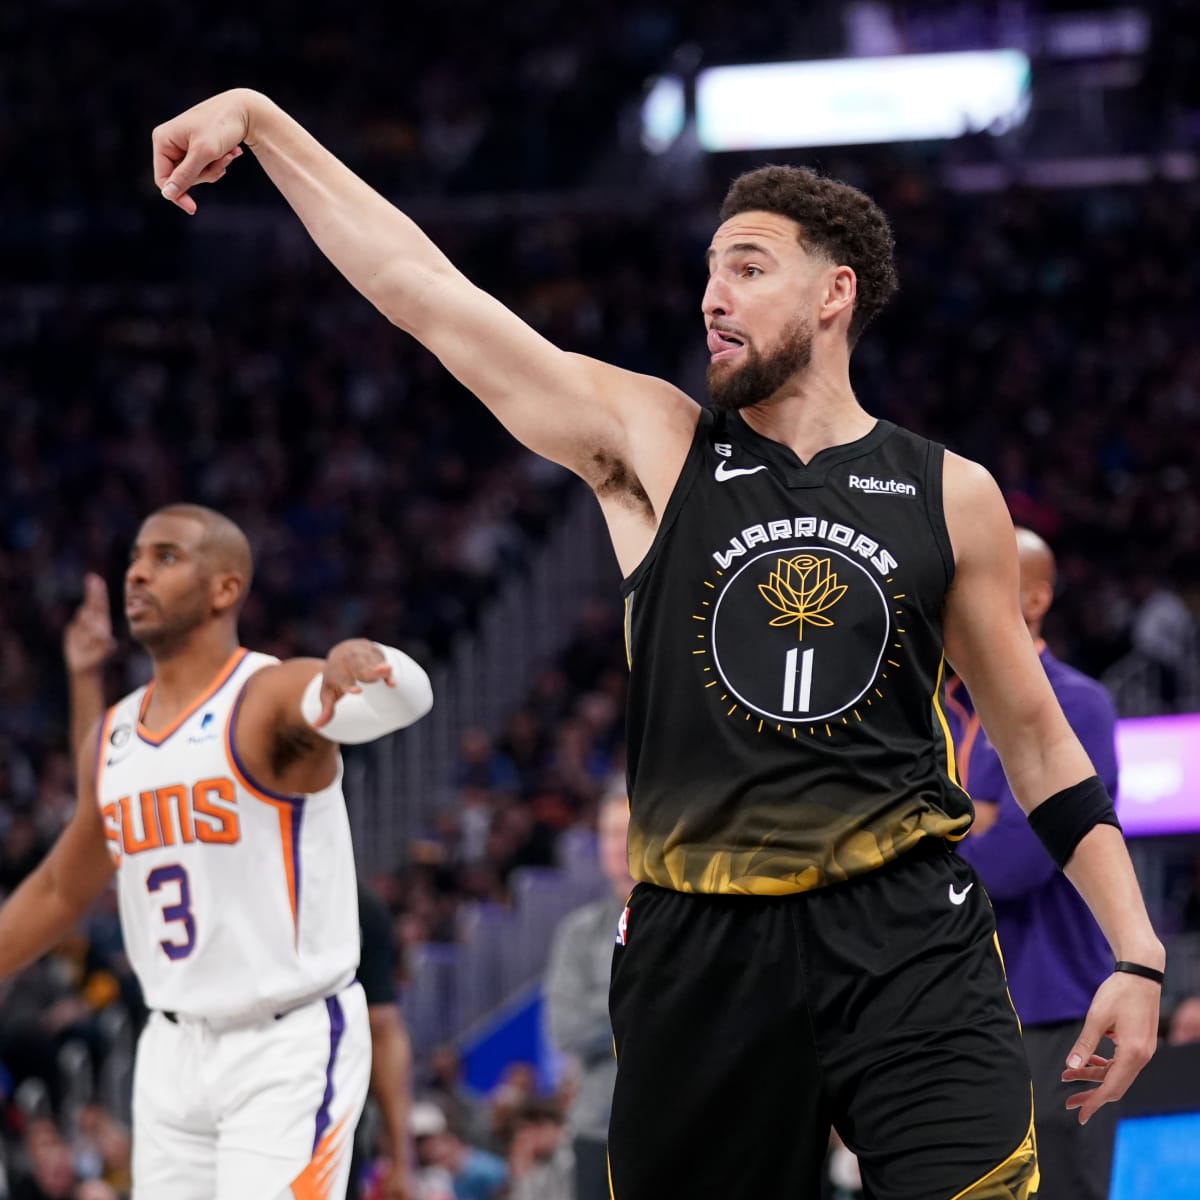 Warriors Nearly Traded Steph Curry, Klay Thompson for Chris Paul